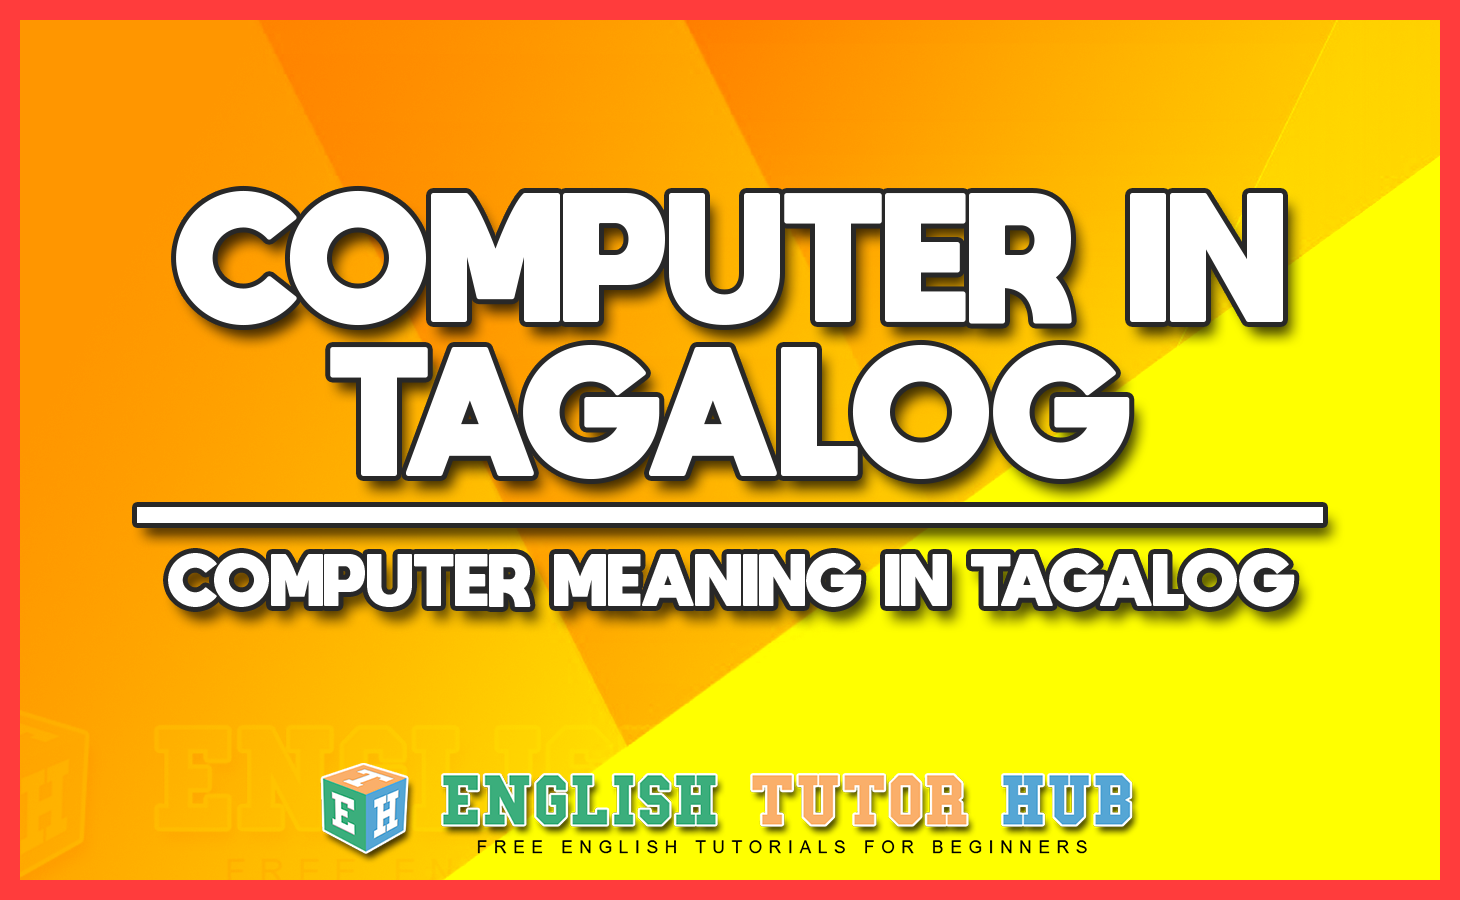 COMPUTER IN TAGALOG - COMPUTER MEANING IN TAGALOG